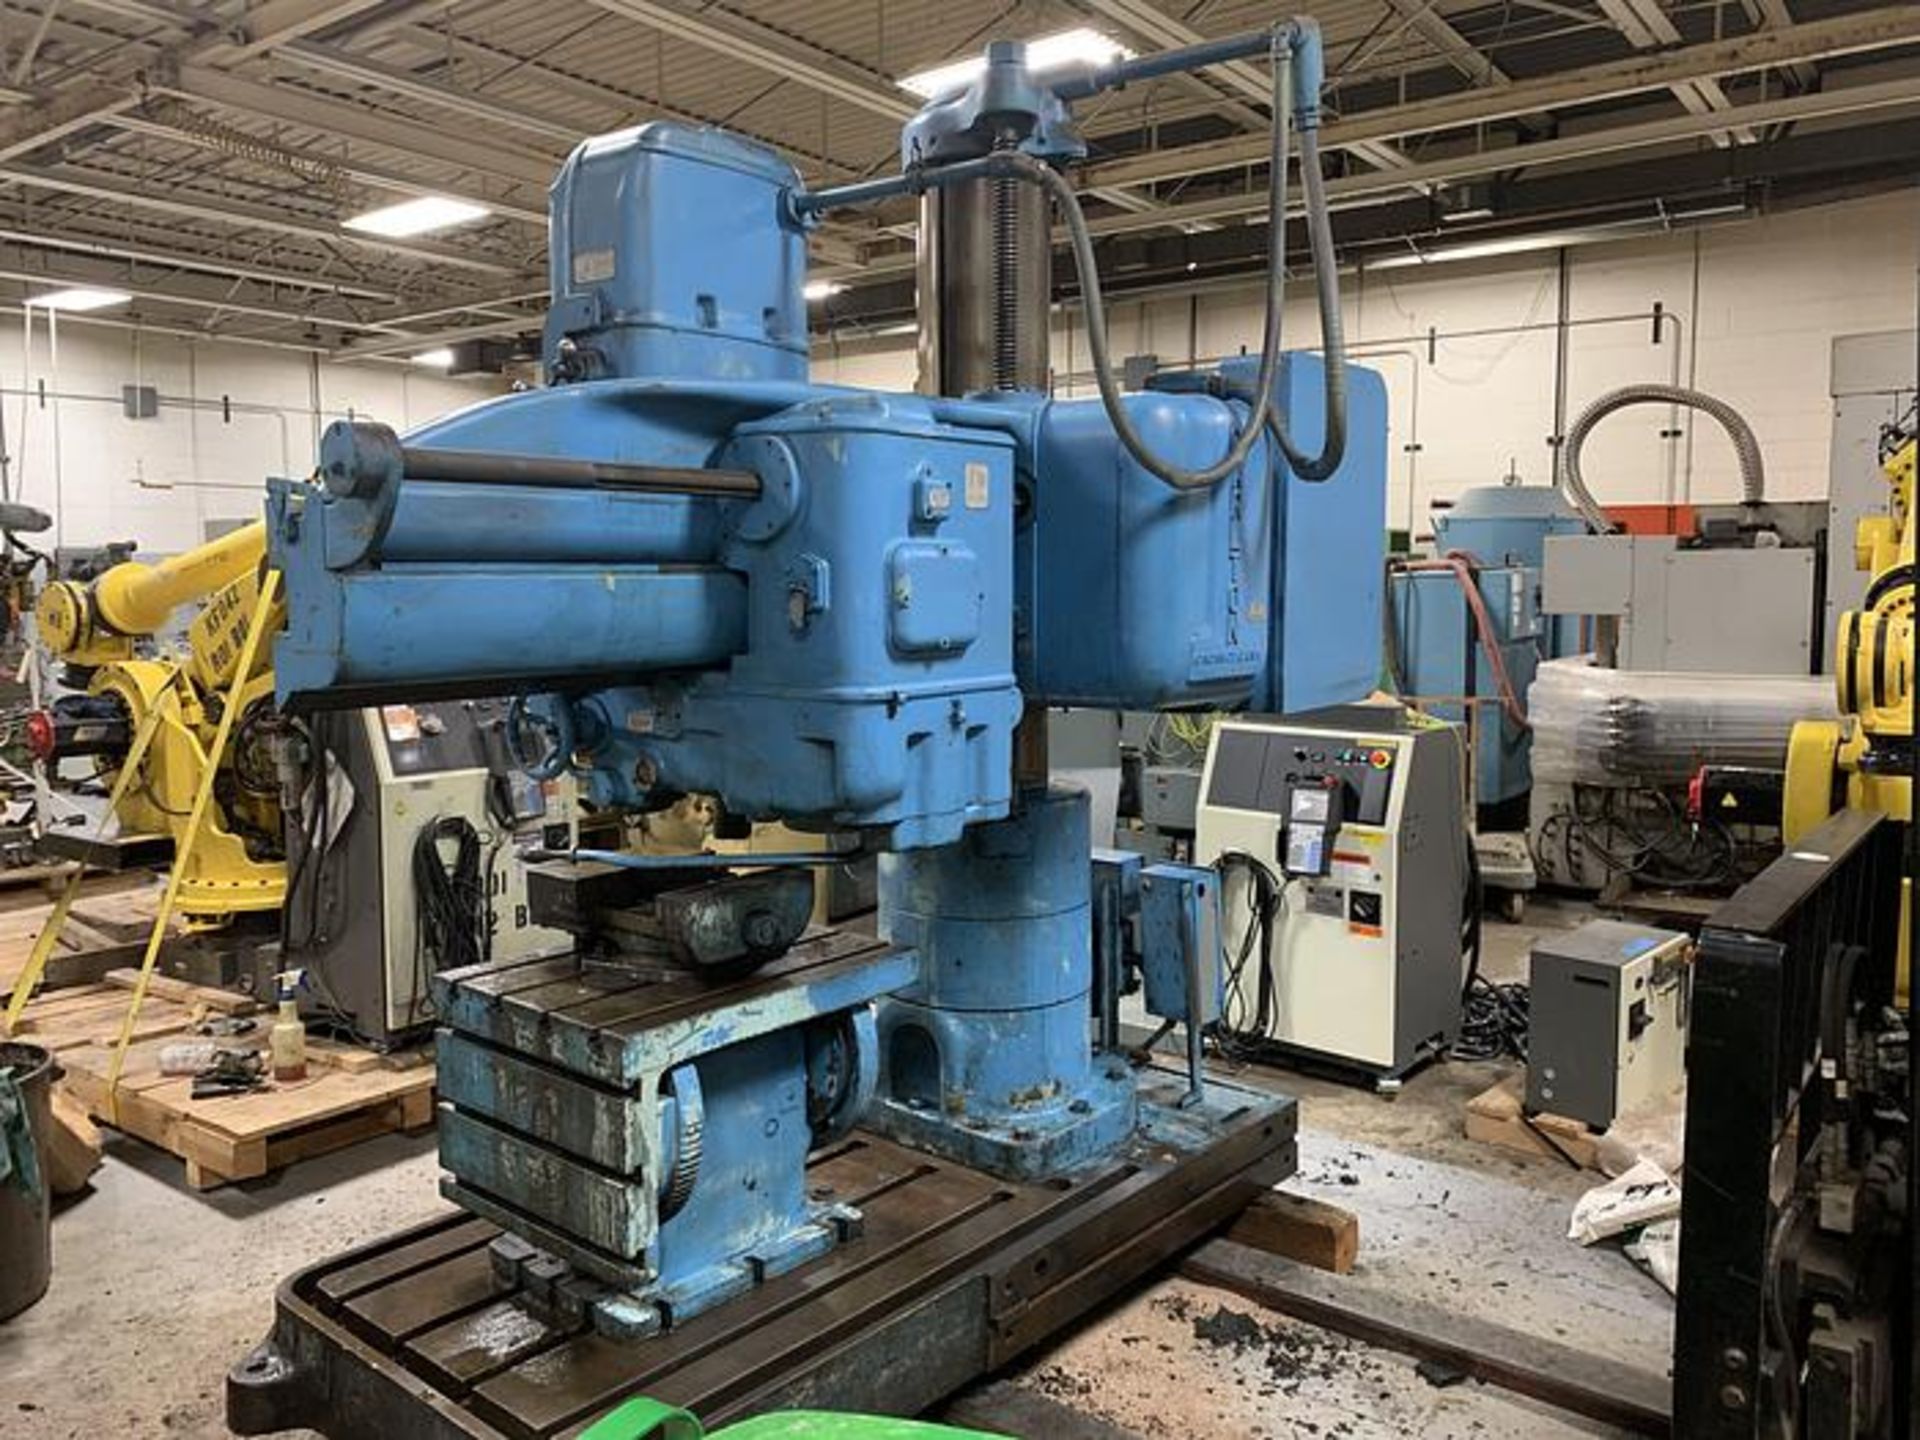 1-USED CARLTON 4' X 13" RADIAL DRILL WITH 3A PRE-SELECT HEAD, SERIAL NUMBER 3A-4542